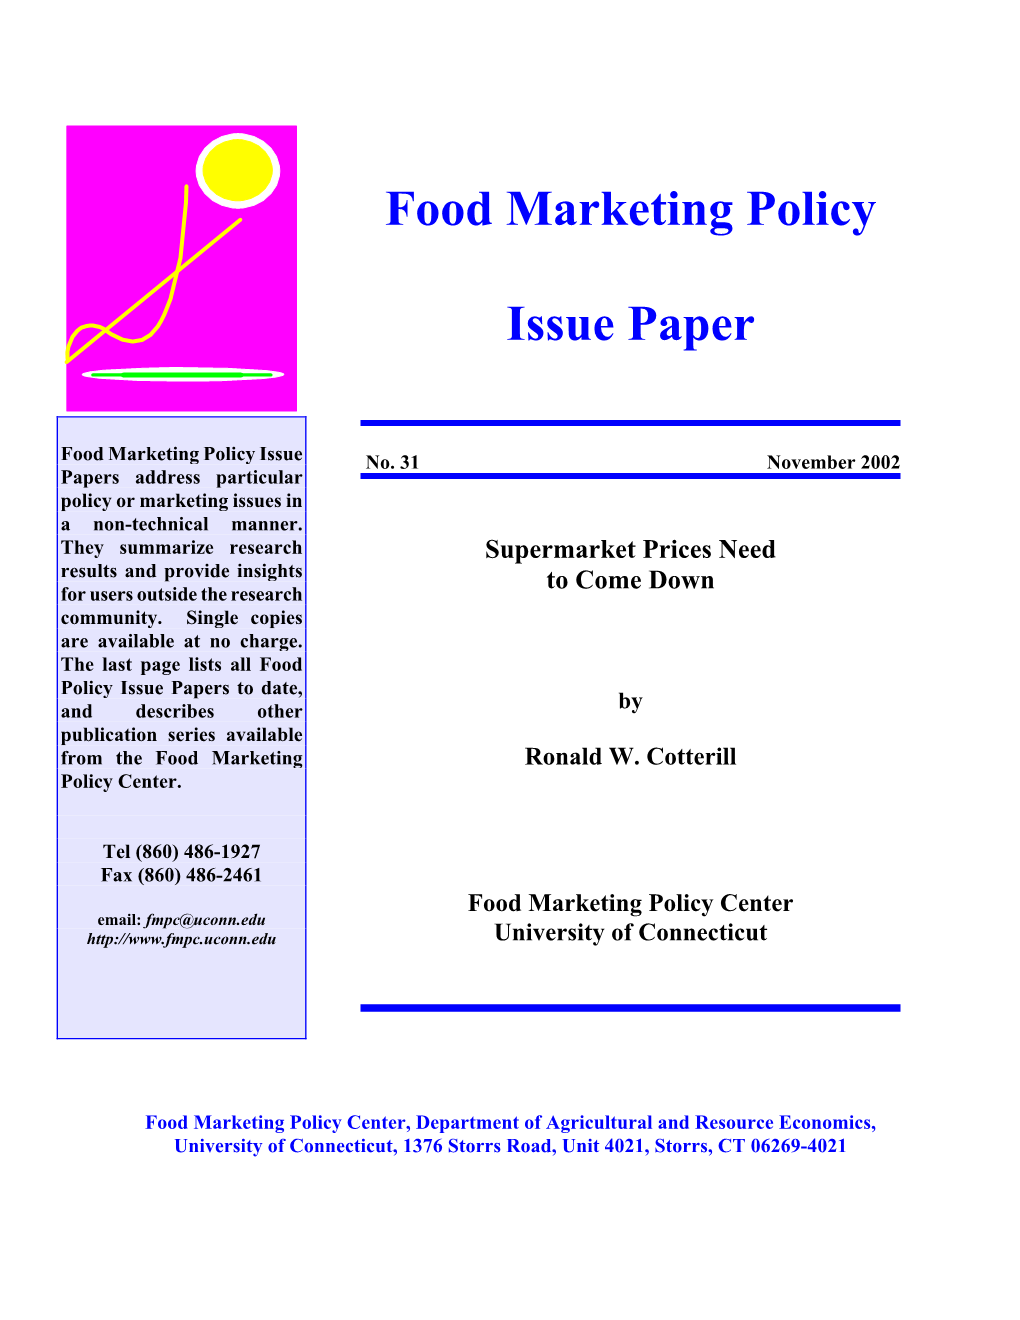 Food Marketing Policy Issue Paper